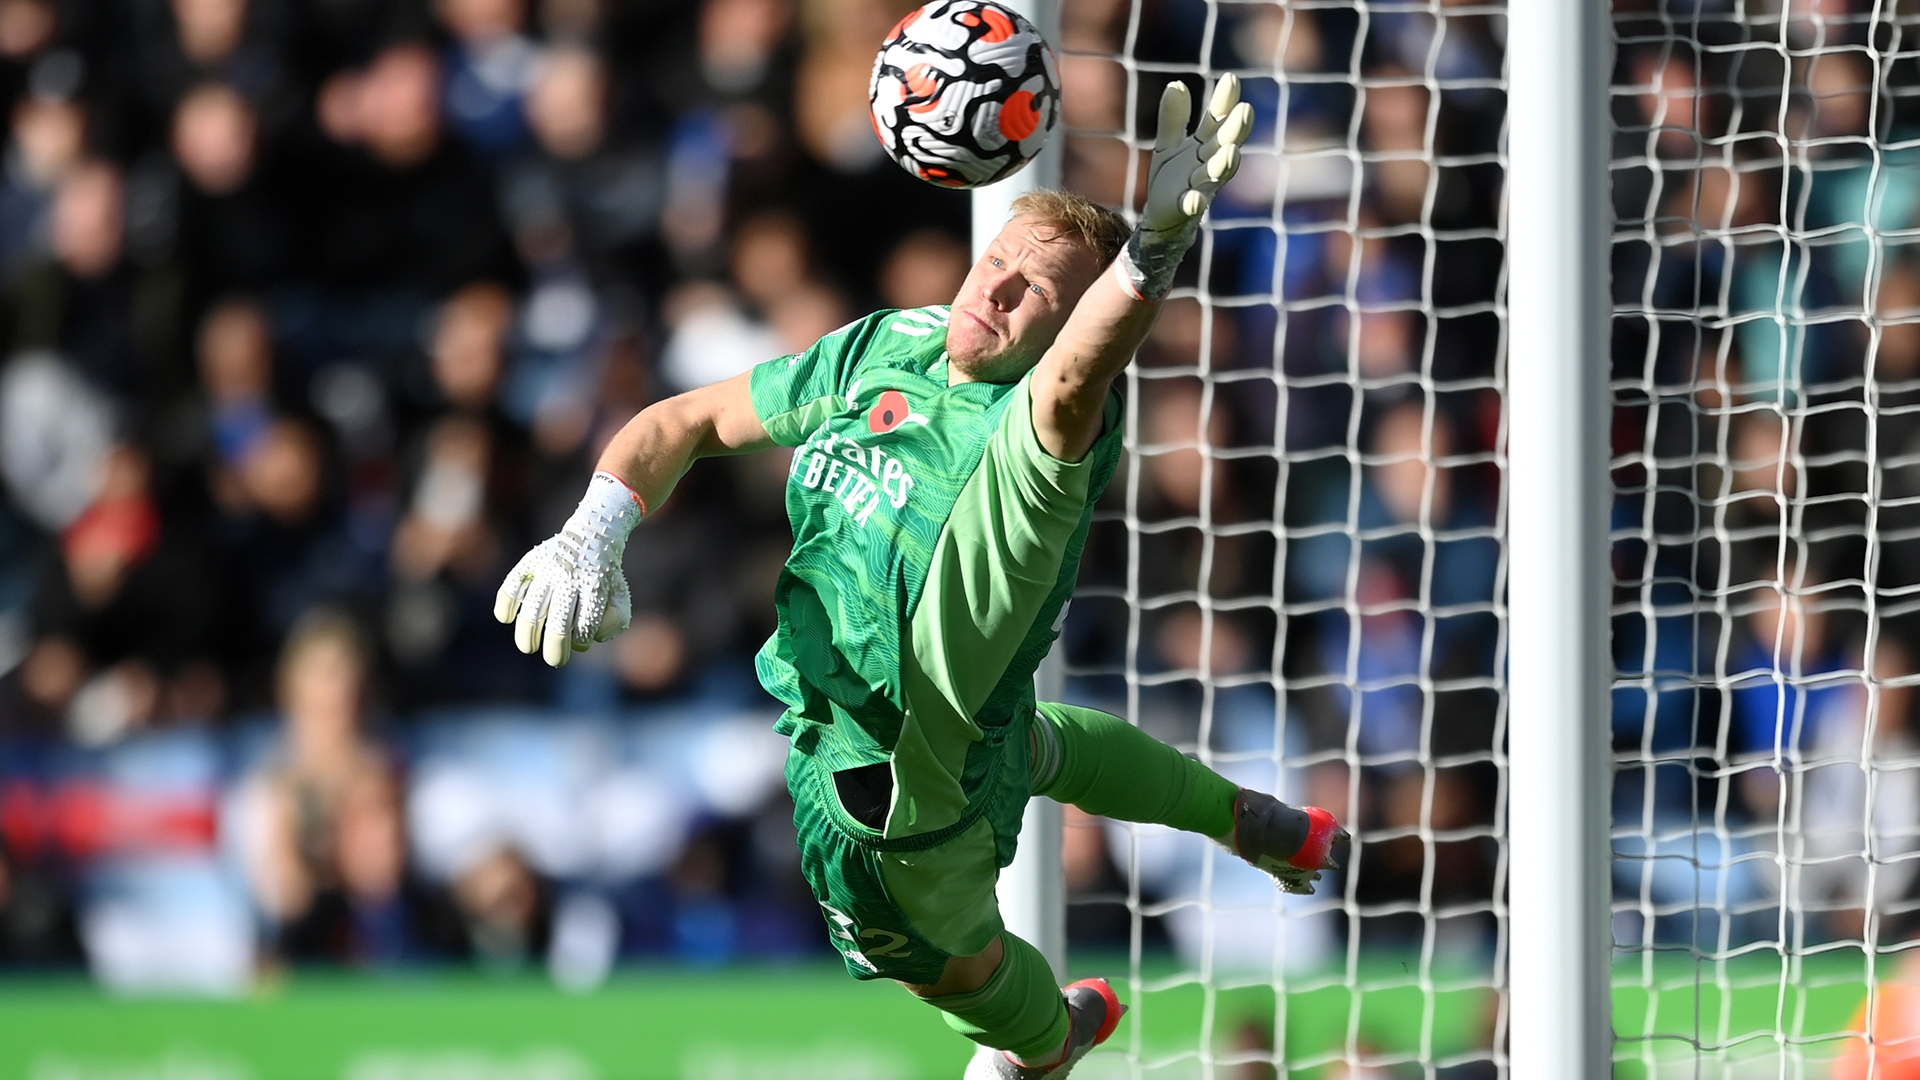 Best save I've seen in years!' - Ramsdale heroics earn Arsenal record  statement win at Leicester | Goal.com